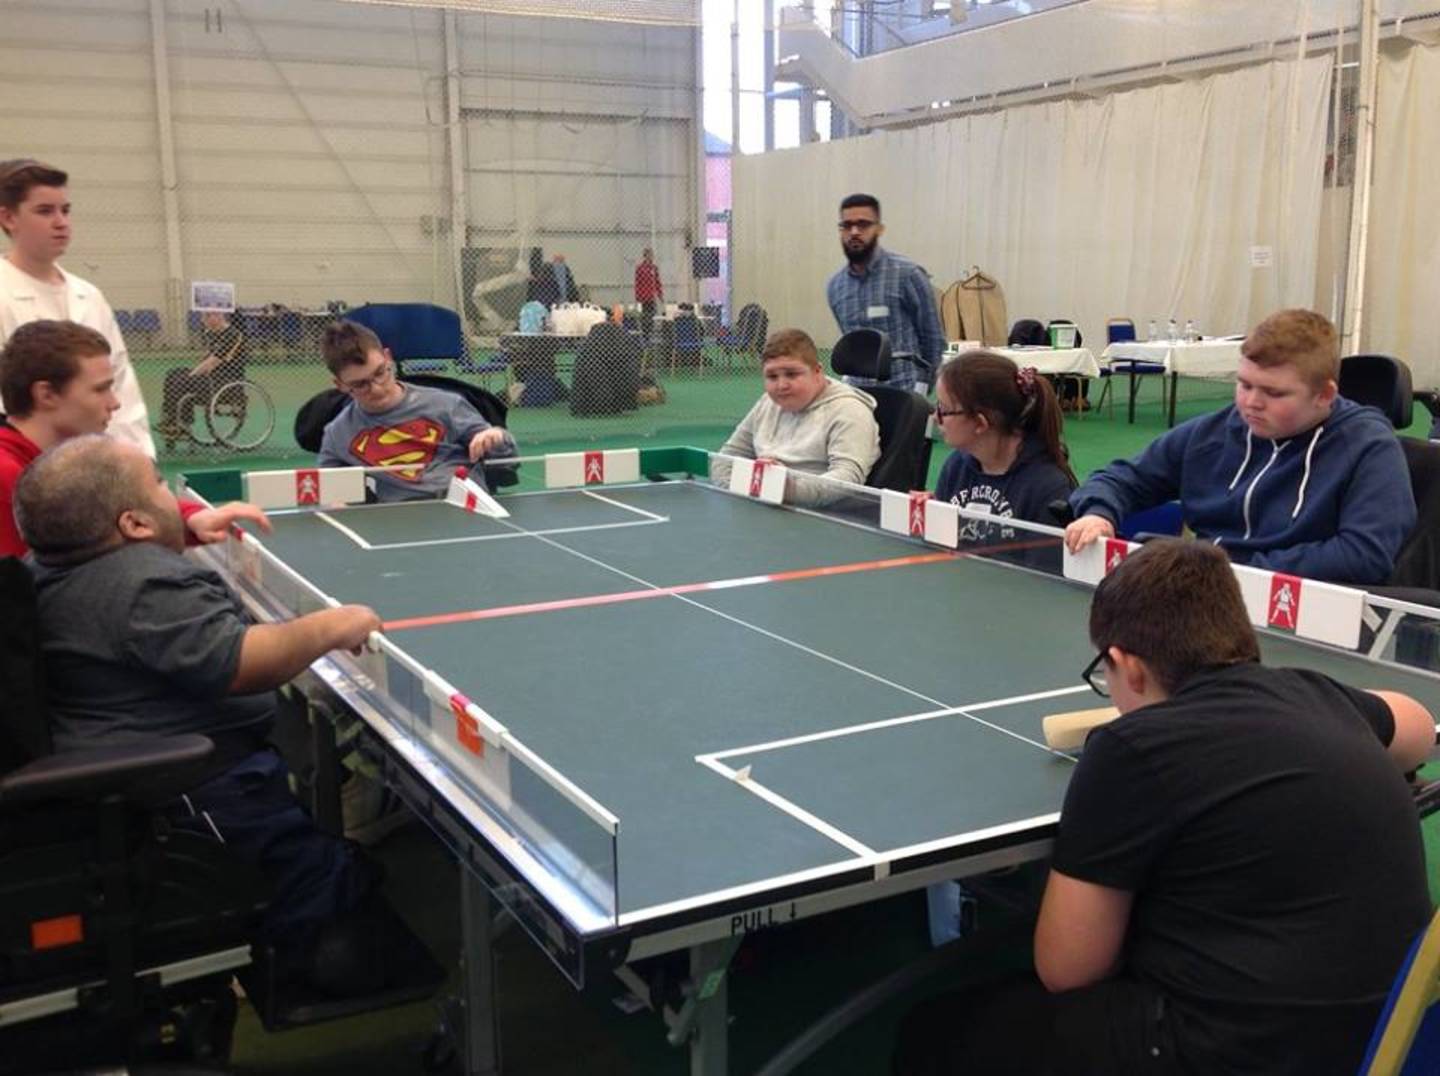 Teams taking part in table cricket match